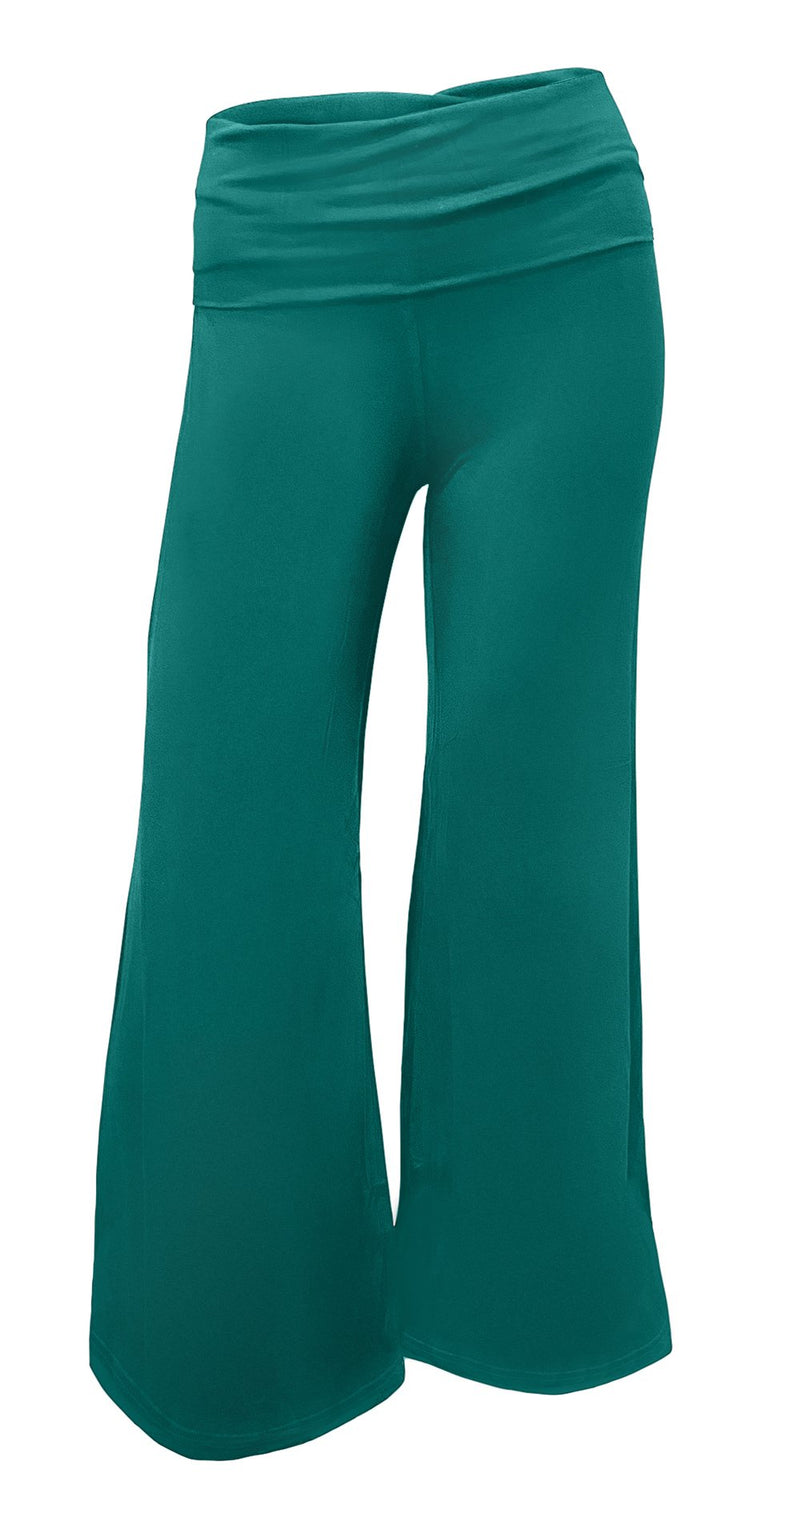 Chartreuse Green 100% Modal Eco Friendly Pant